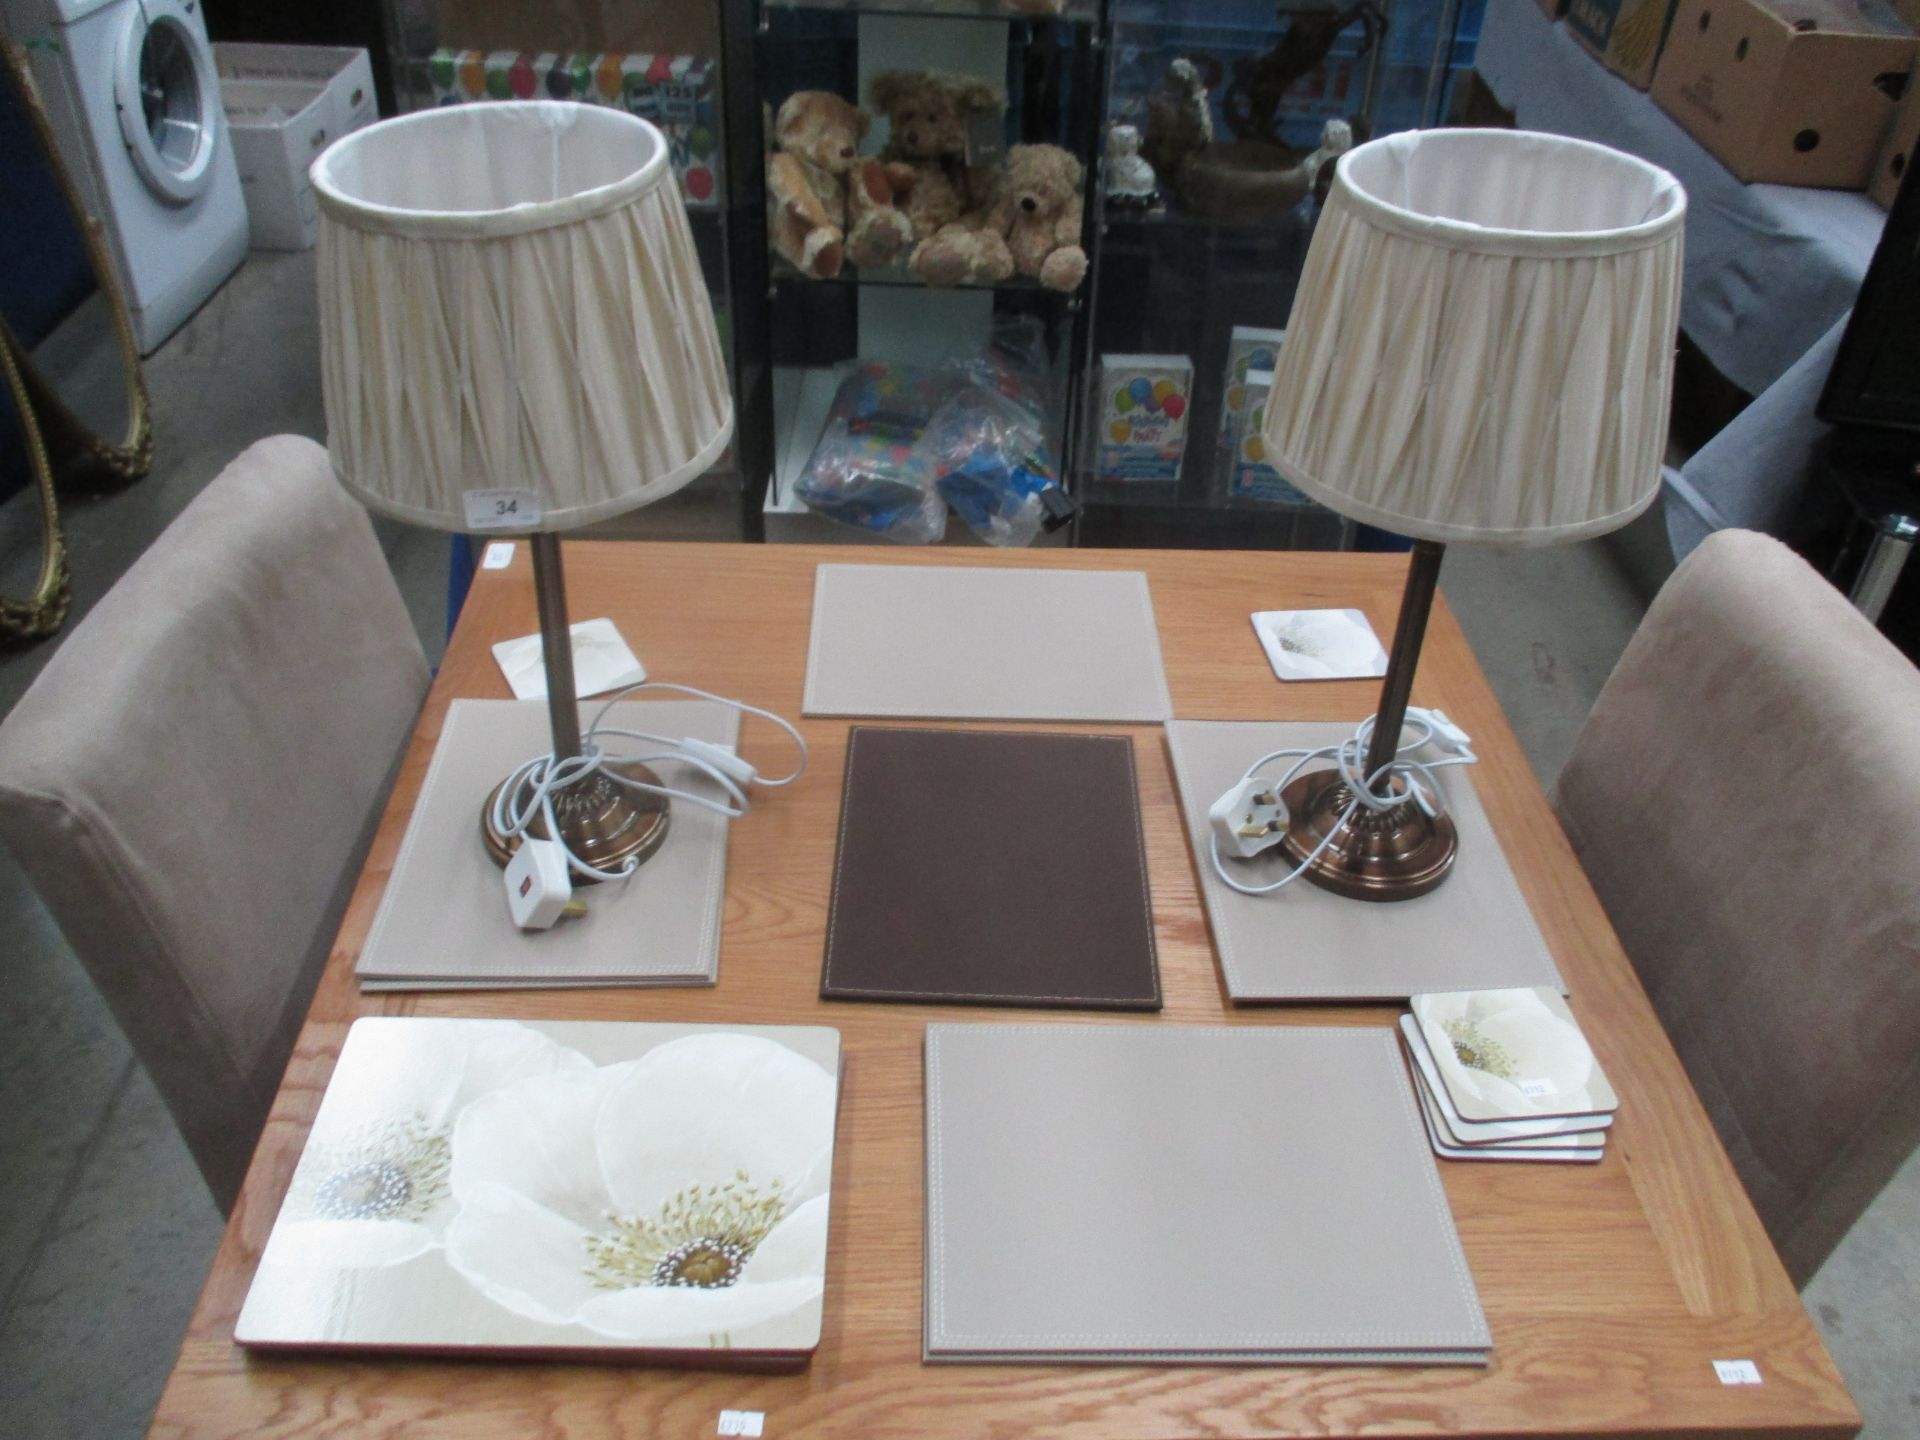 A pair of bronze effect table lamps and a quantity of table mats (some floral patterned)